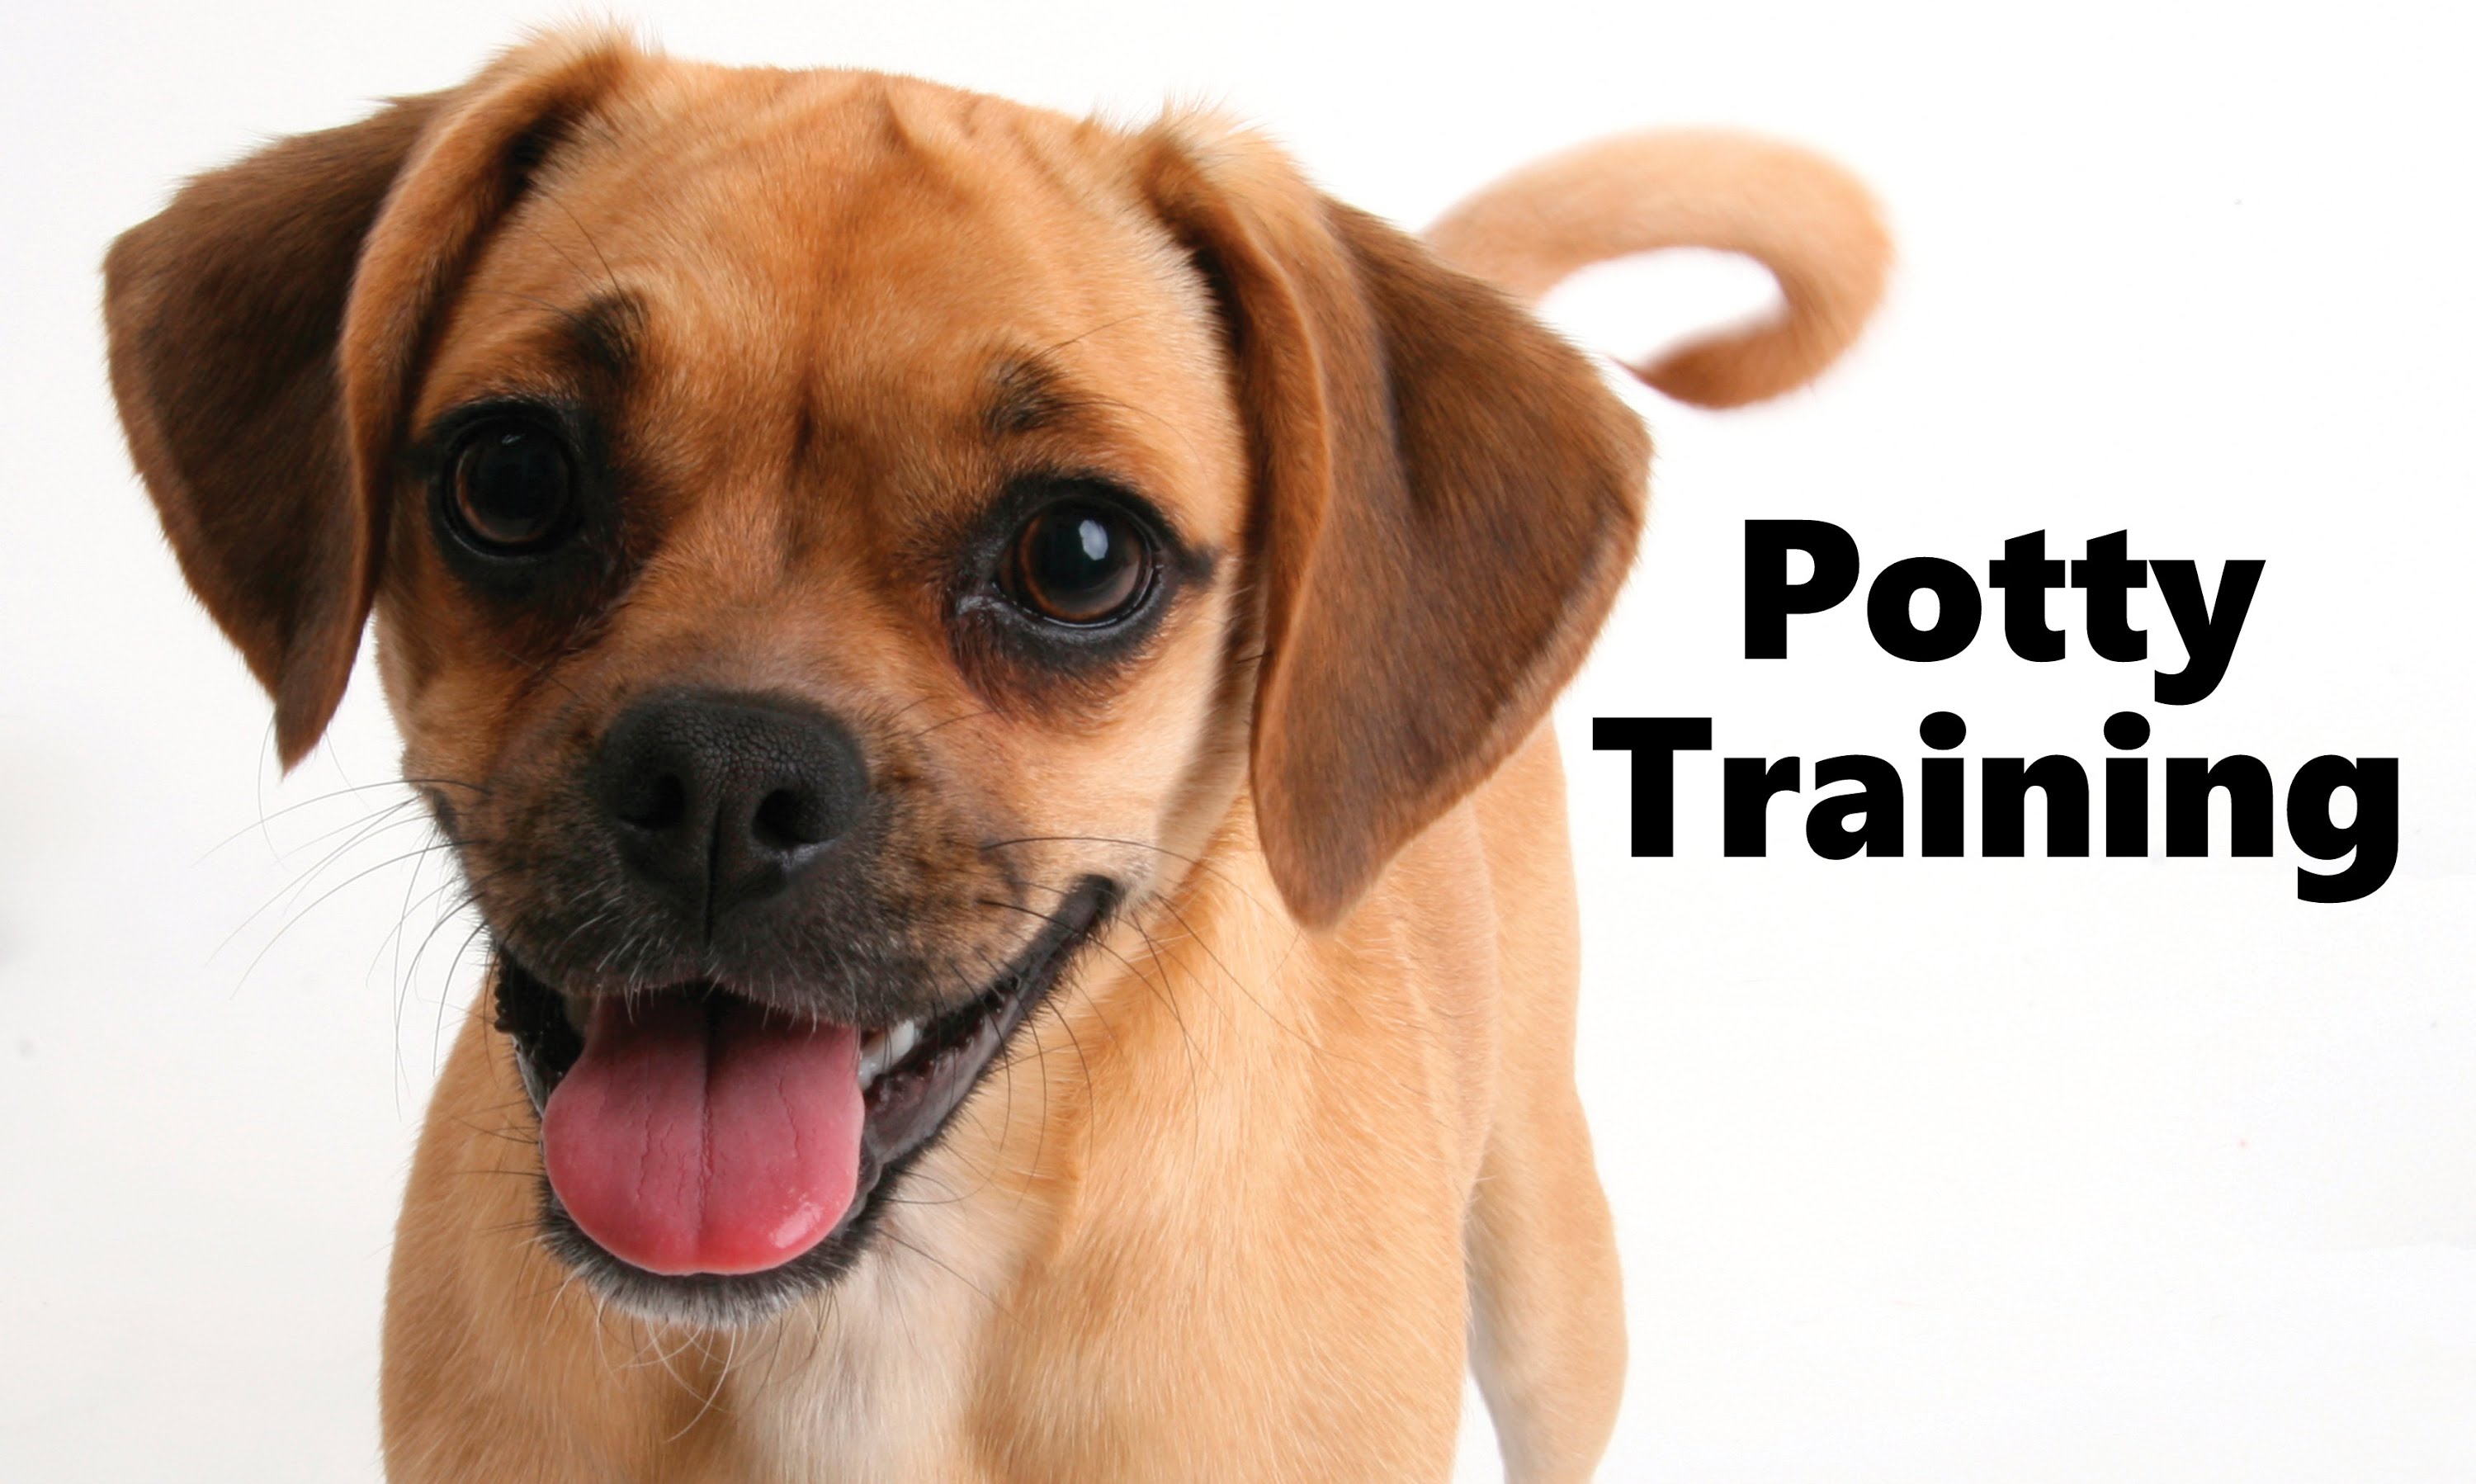 How To Potty Train A Puggle Puppy - Puggle House Training Tips ...